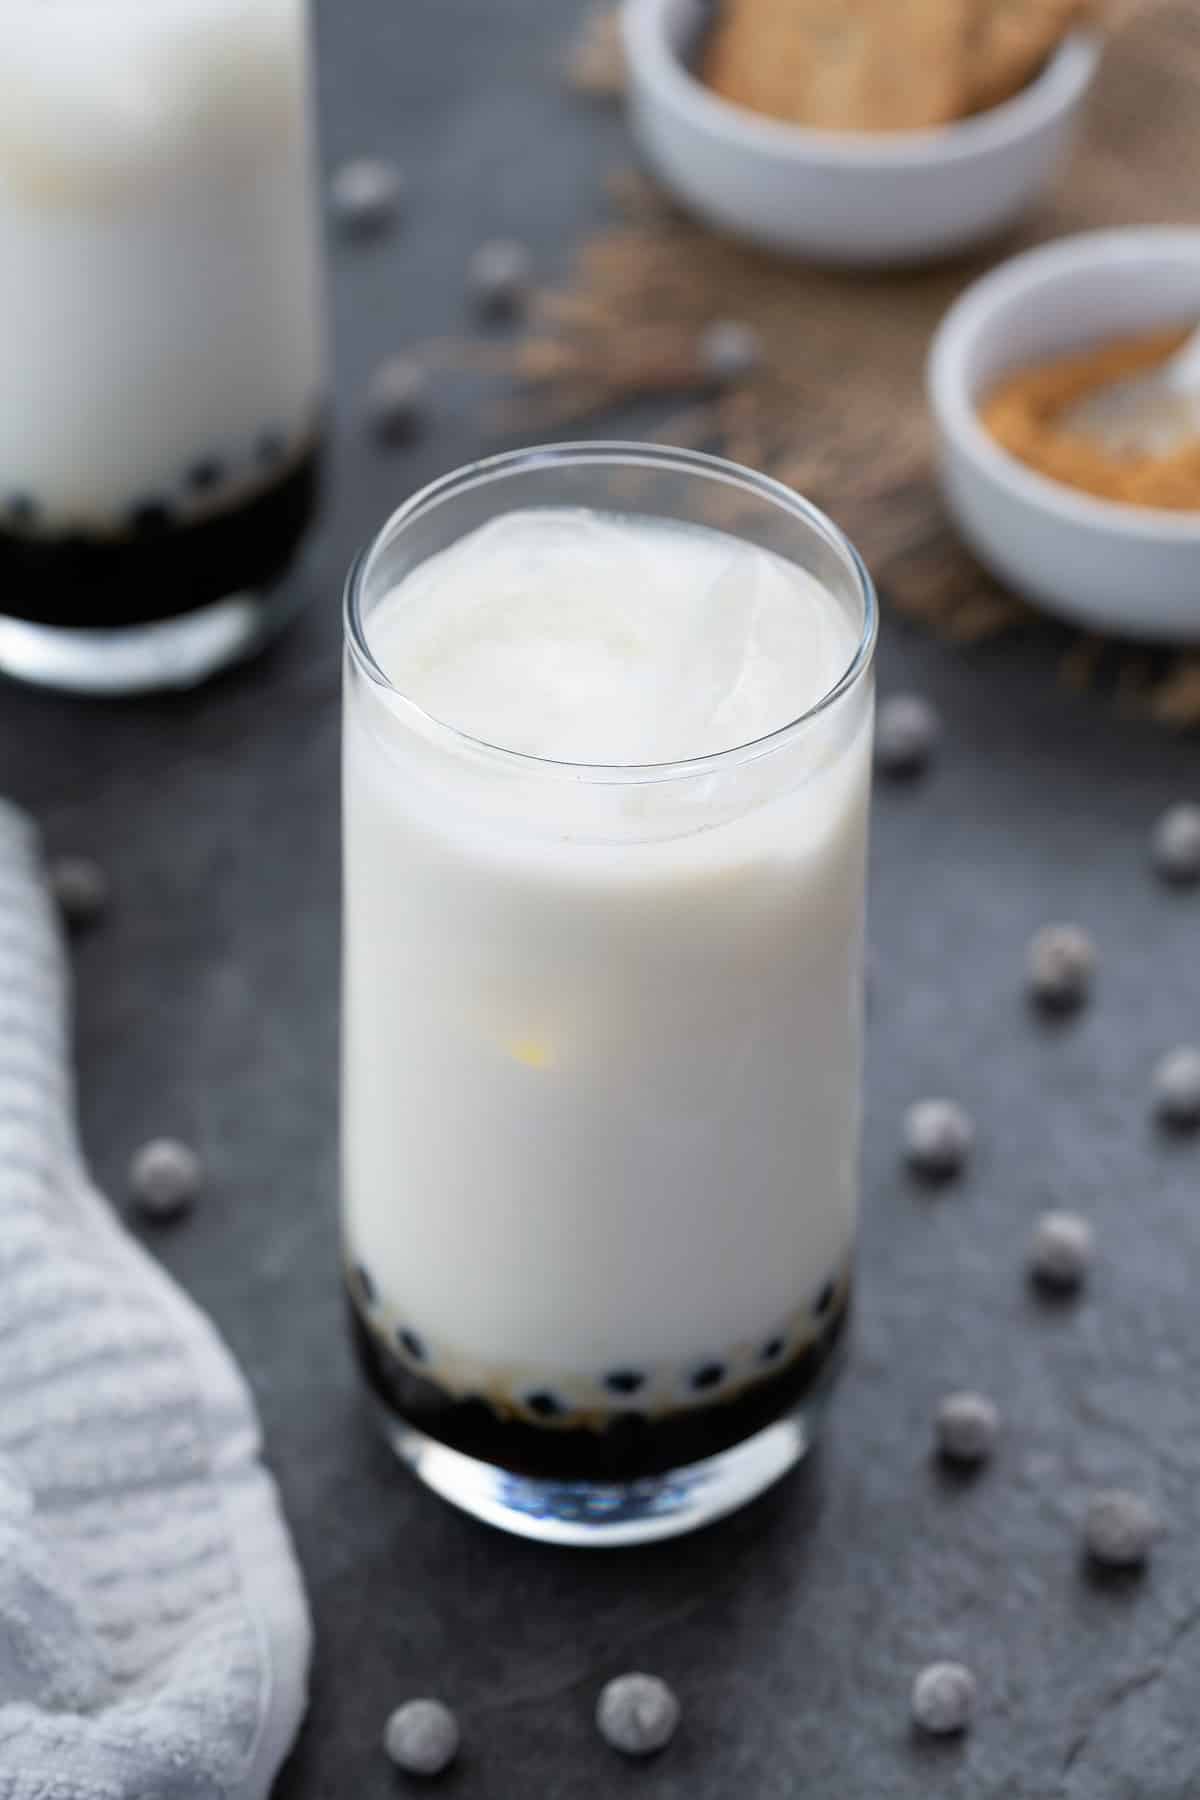 Brown Sugar boba milk served in a glass with boba pearls scattered around.